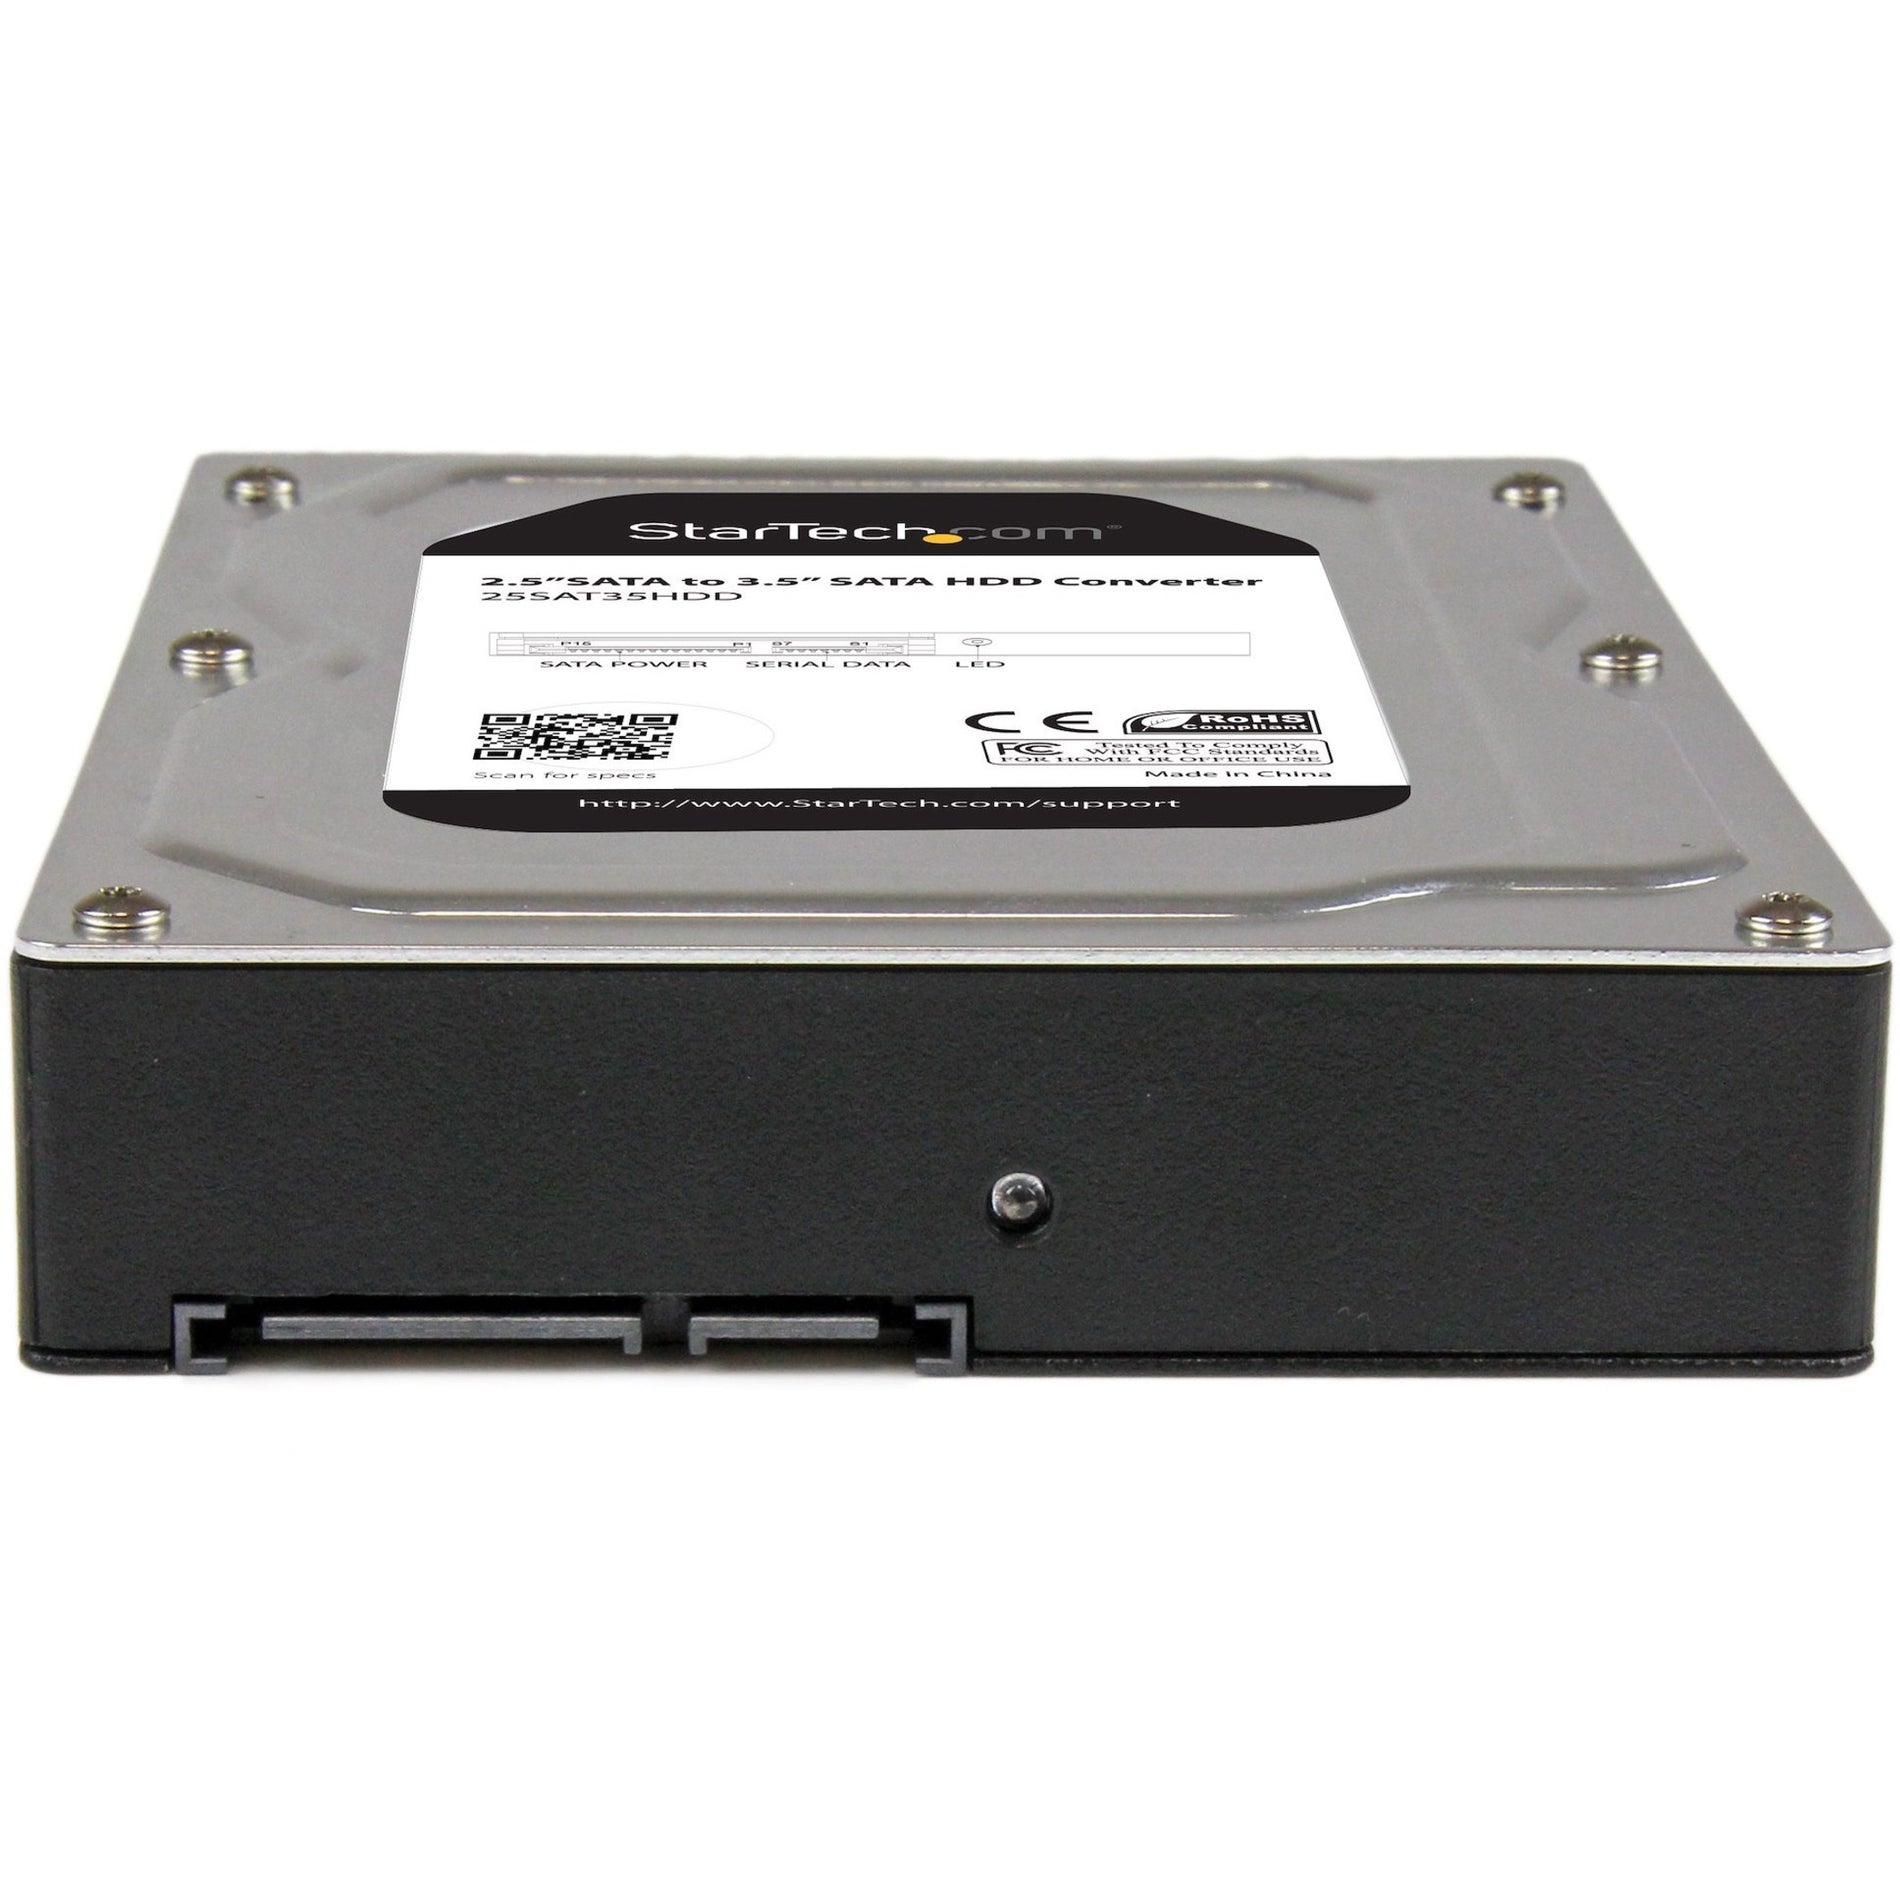 StarTech.com 25SAT35HDD 2.5" to 3.5" SATA HDD/SSD Enclosure, Easy Data Transfer and Storage